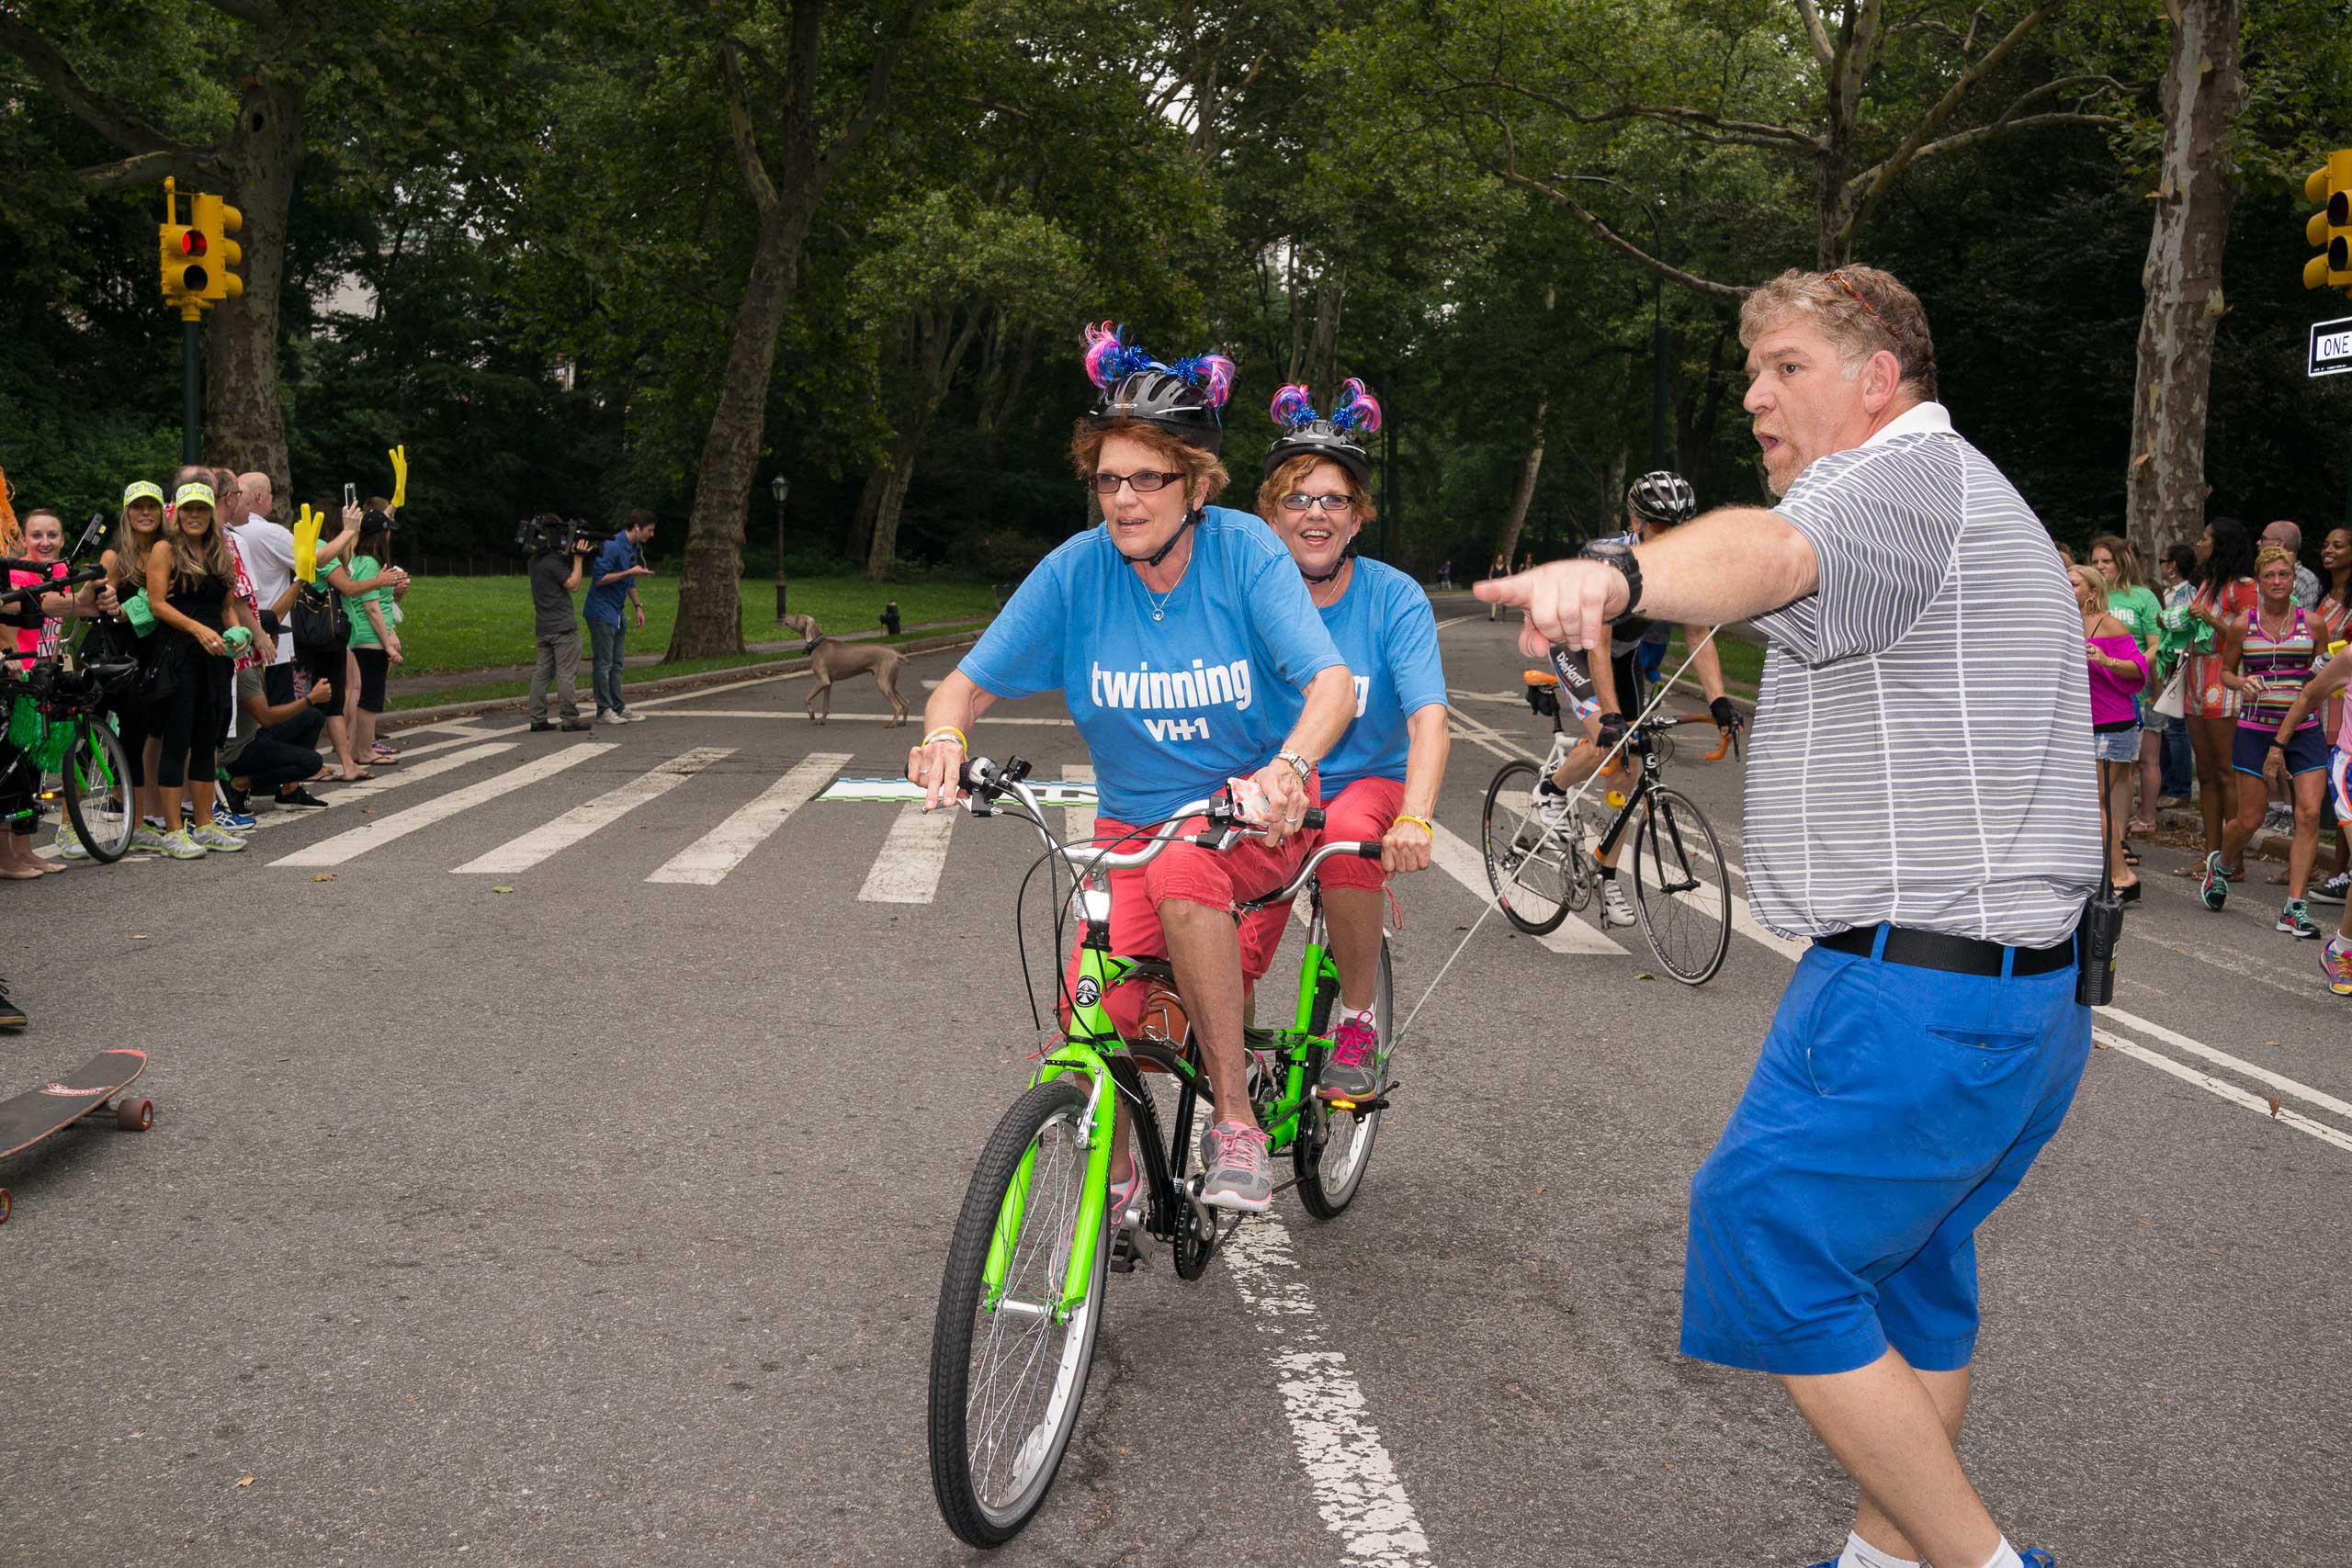 Twins ride over the finish line as hundreds of twins ride tandem bikes in an attempt to set the record for the most twins ever riding tandem bikes, in Central Park in New York City on July 15, 2015.